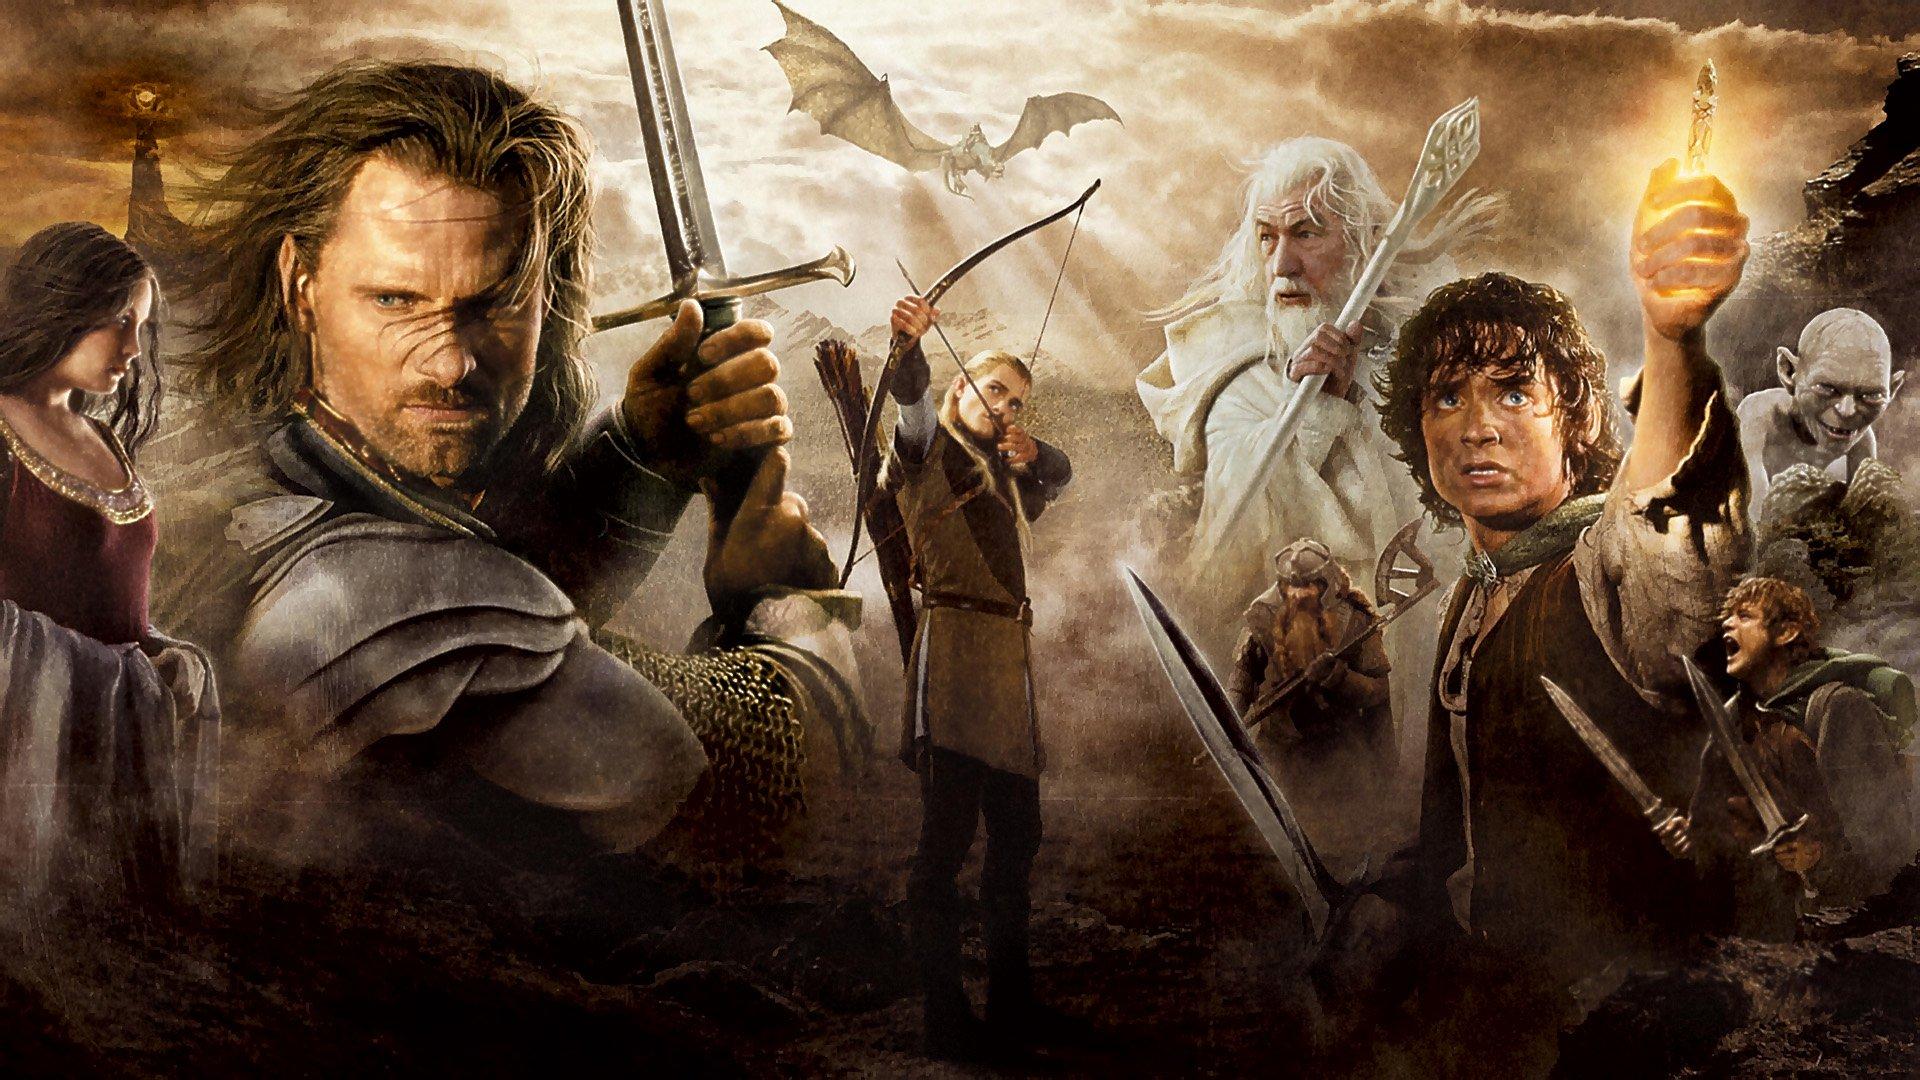 The Lord of the Rings: The Return of the King HD Wallpaper